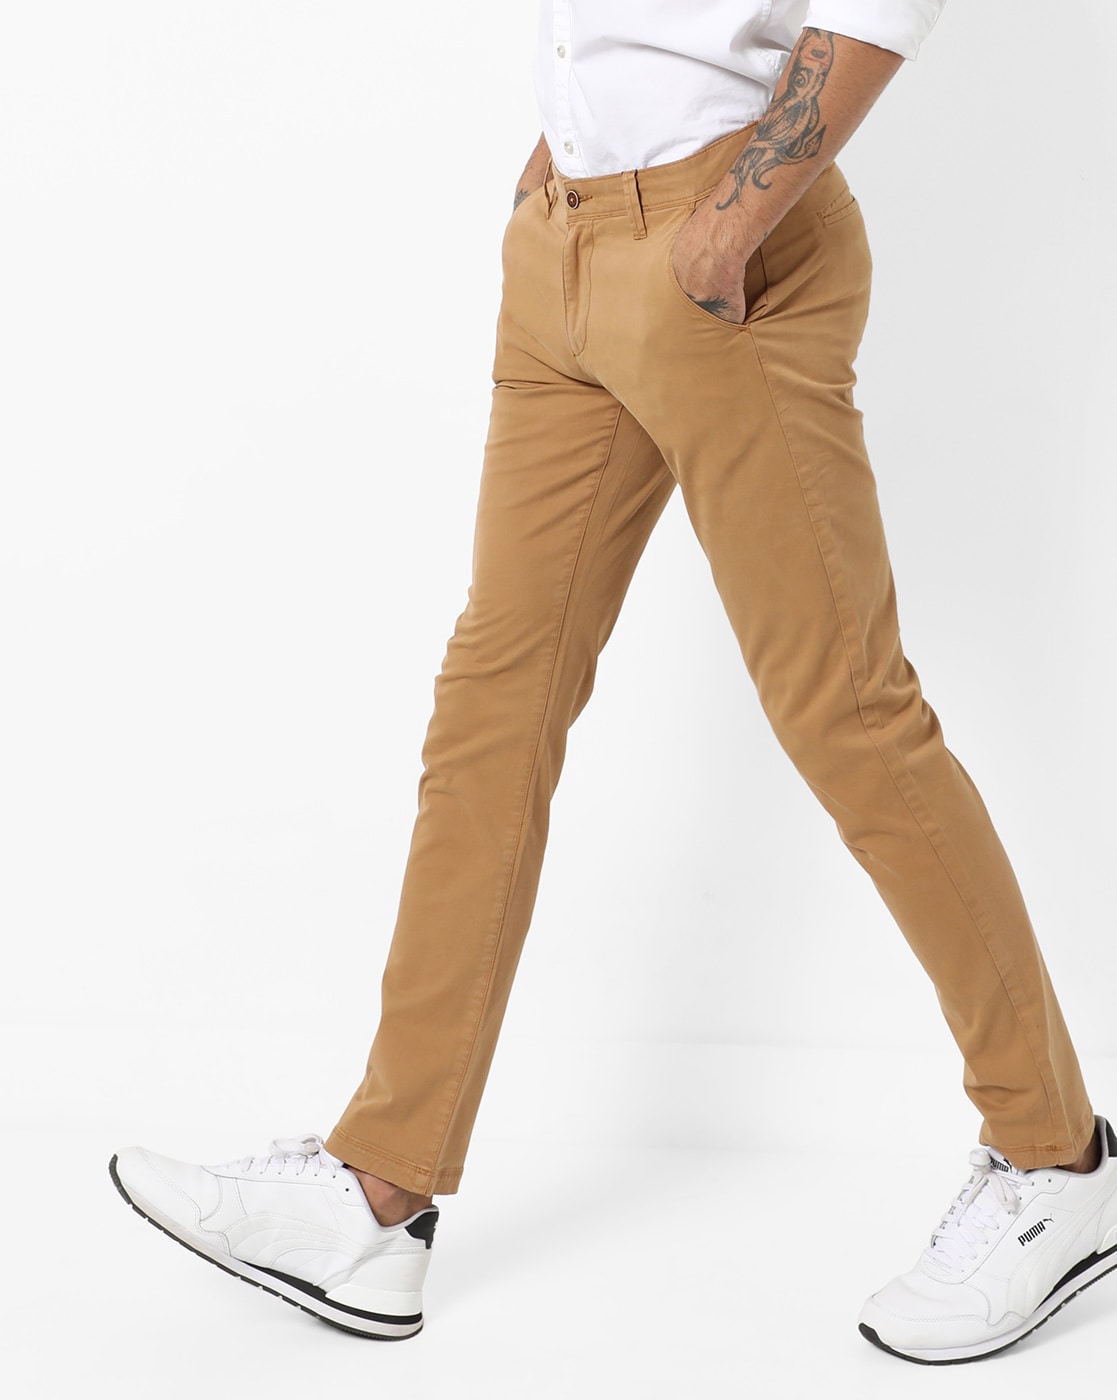 10 Trending Designs of Brown Trousers for Men and Women